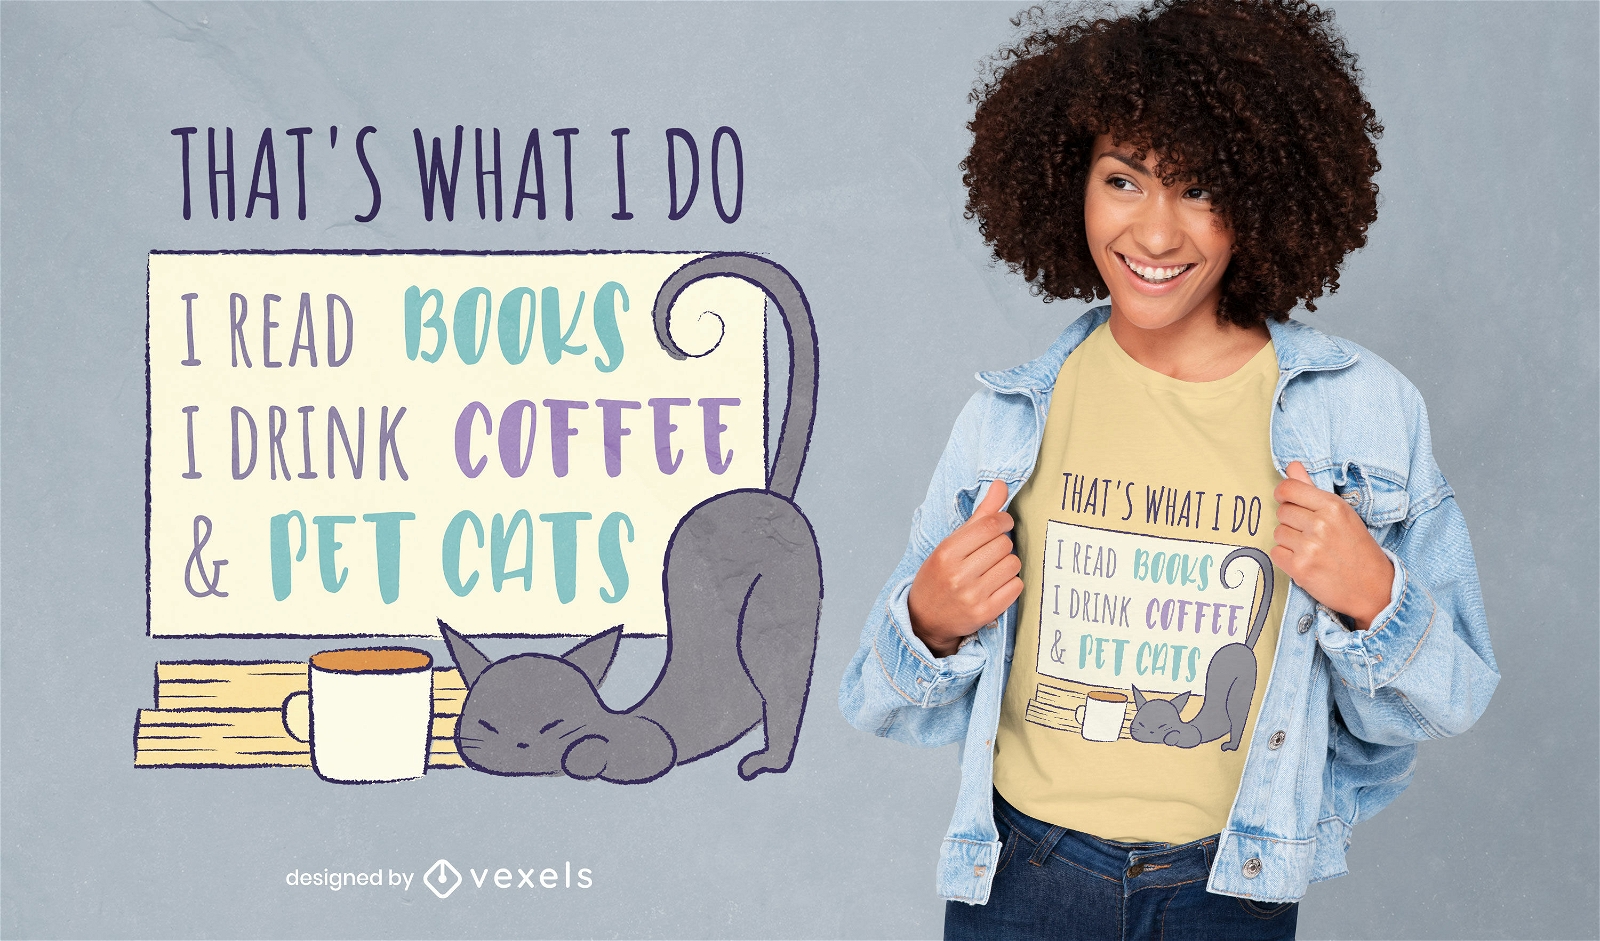 Books cats and coffee t-shirt design